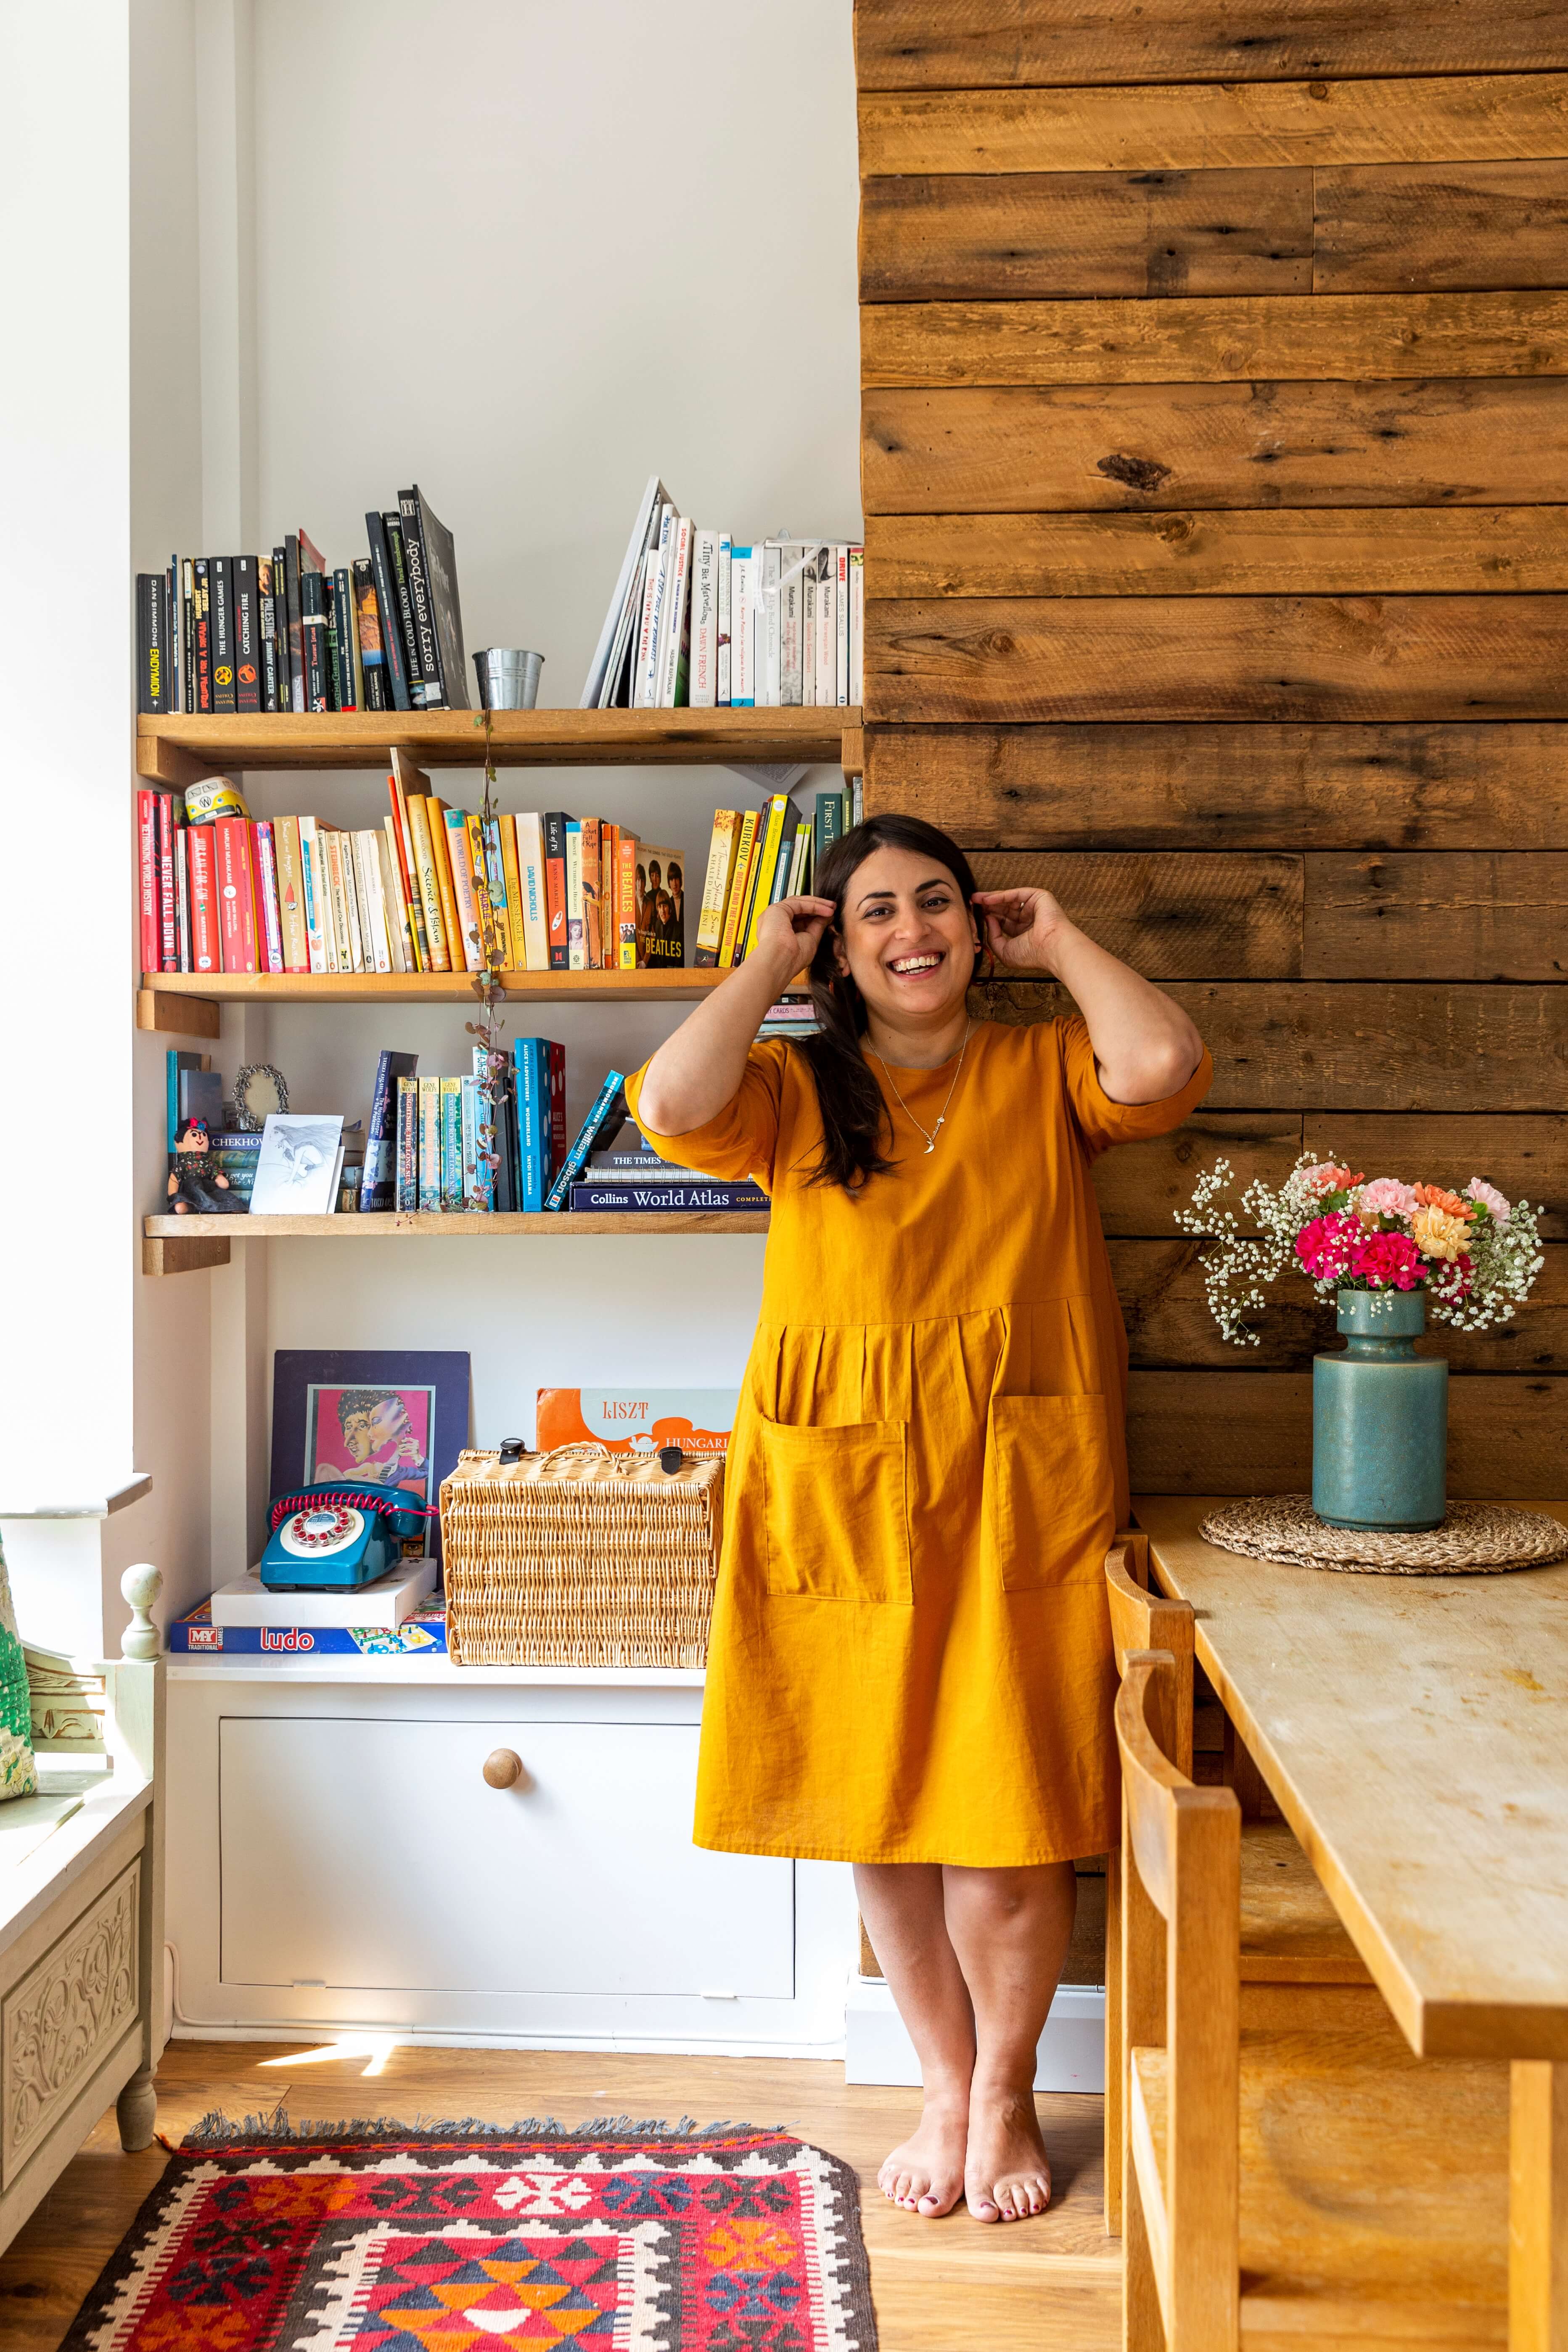 Rida is standing in front of the bookshelf wearing a mustard yellow dress and laughing